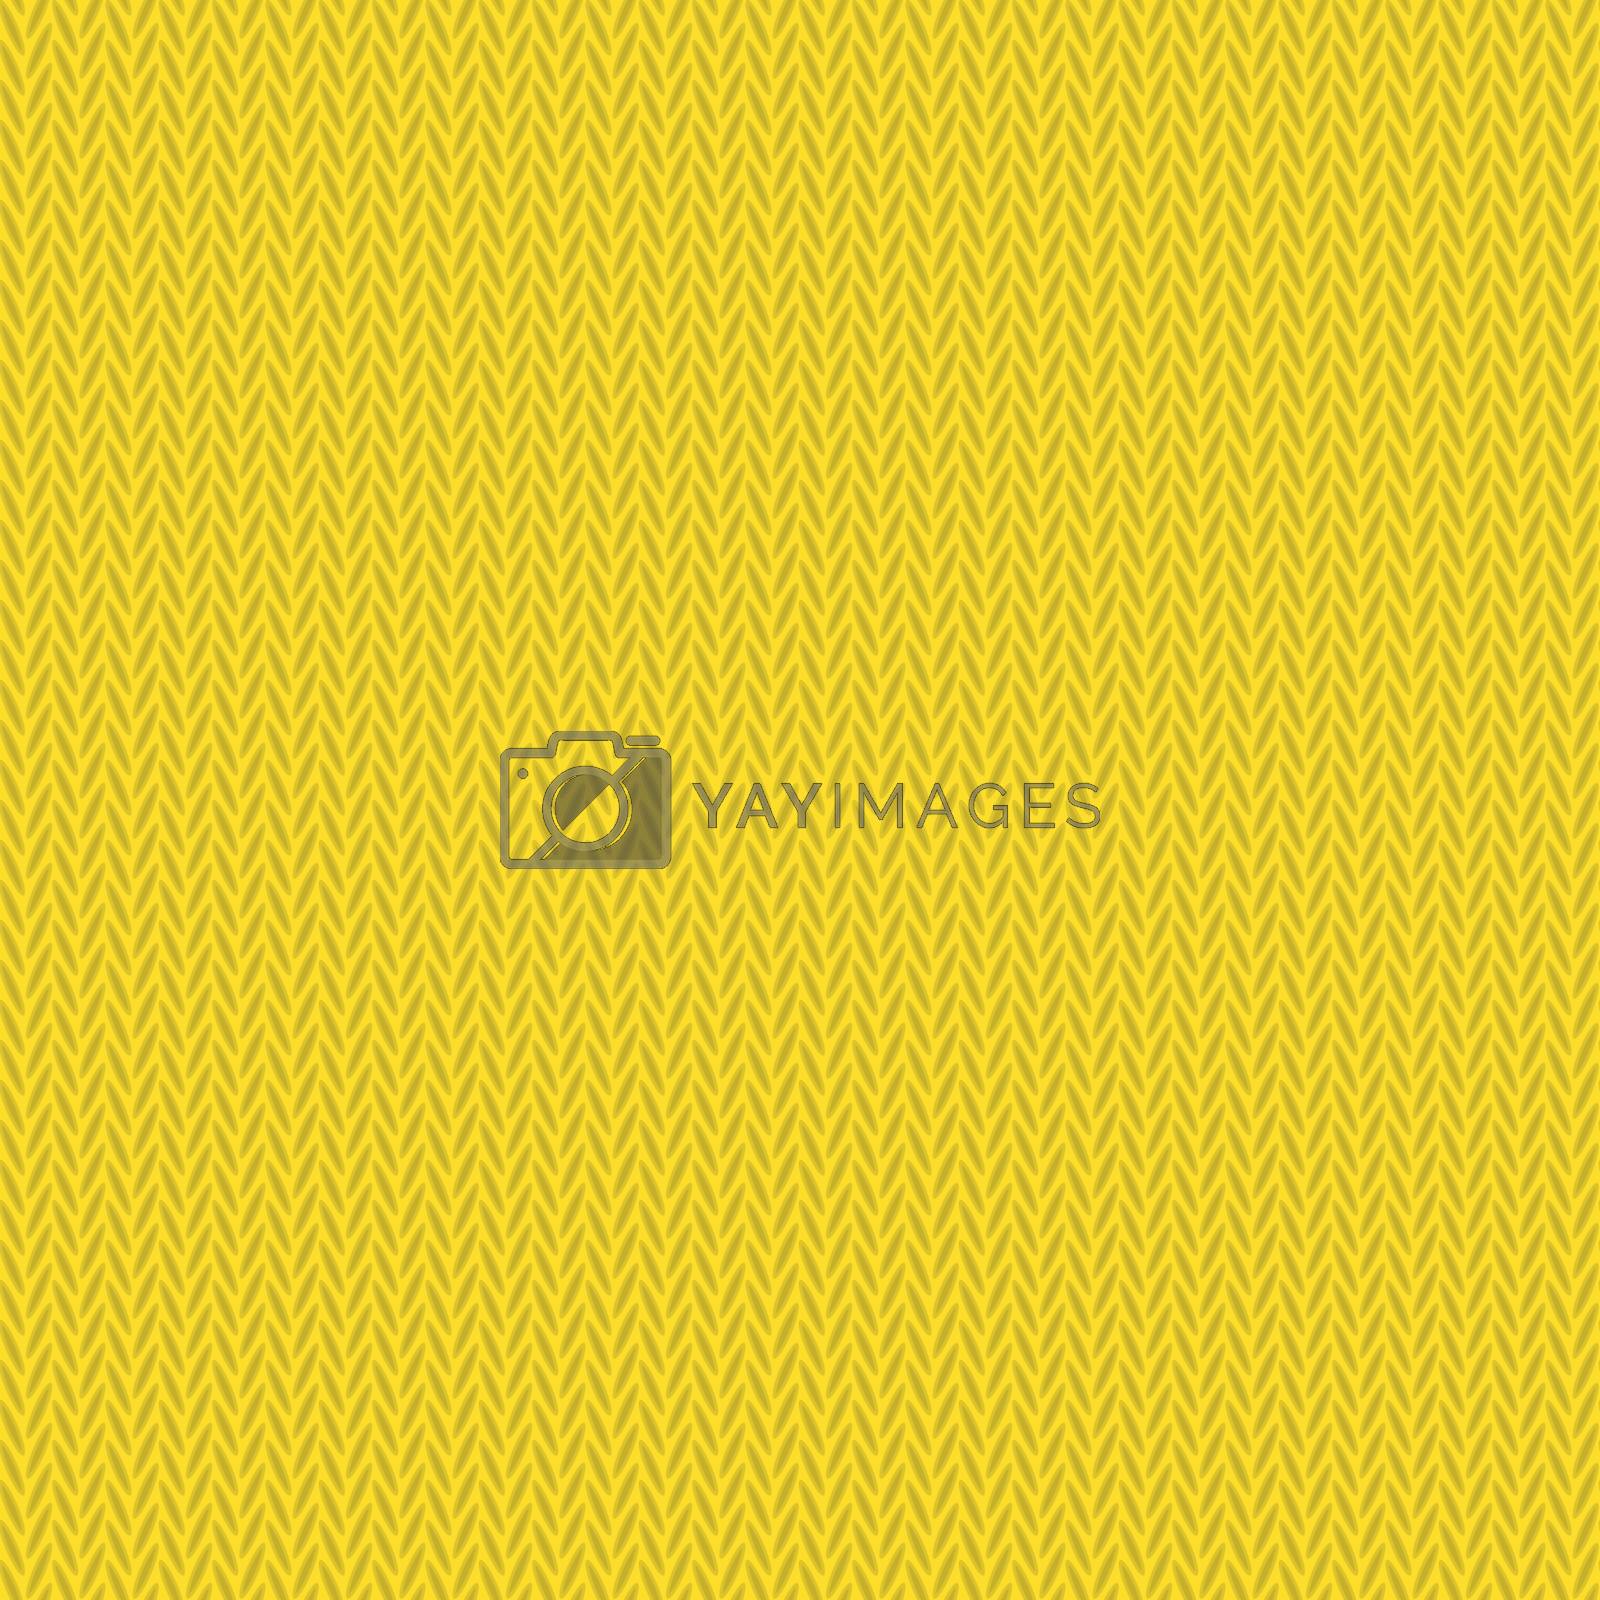 Royalty free image of Knitted background pattern by ggebl